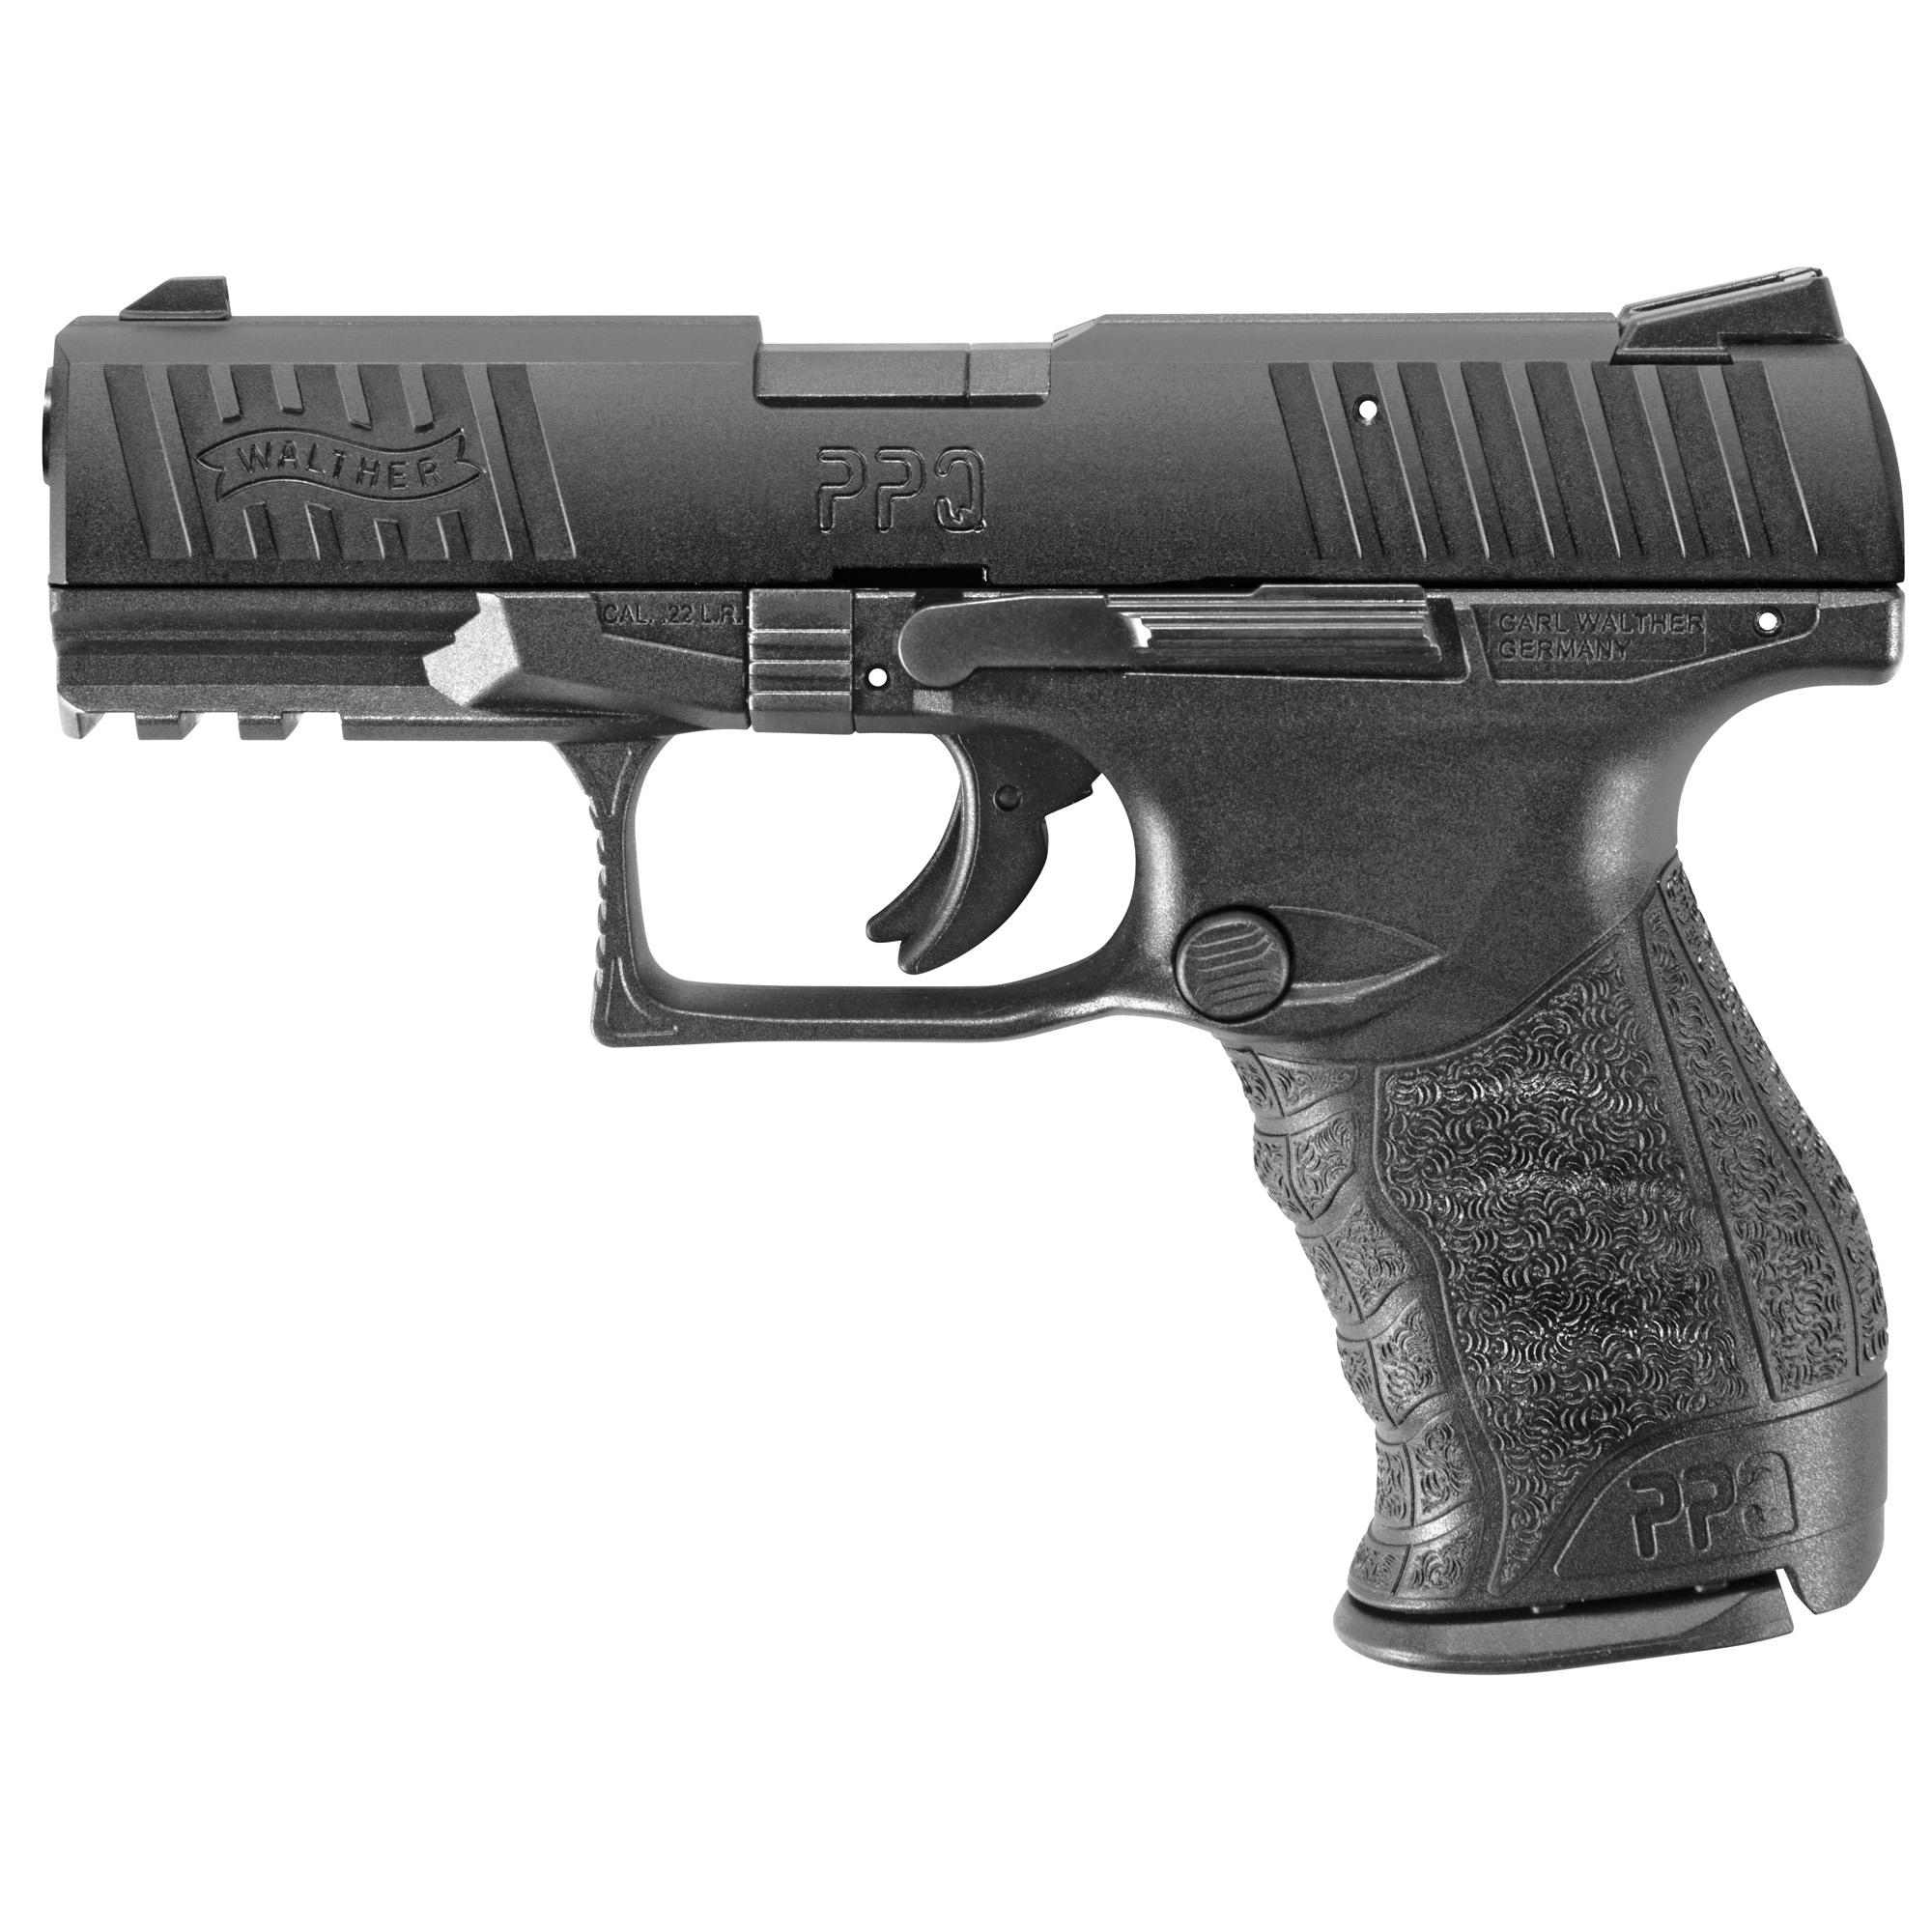 WALTHER PPQ 22LR 4 12RD BLK